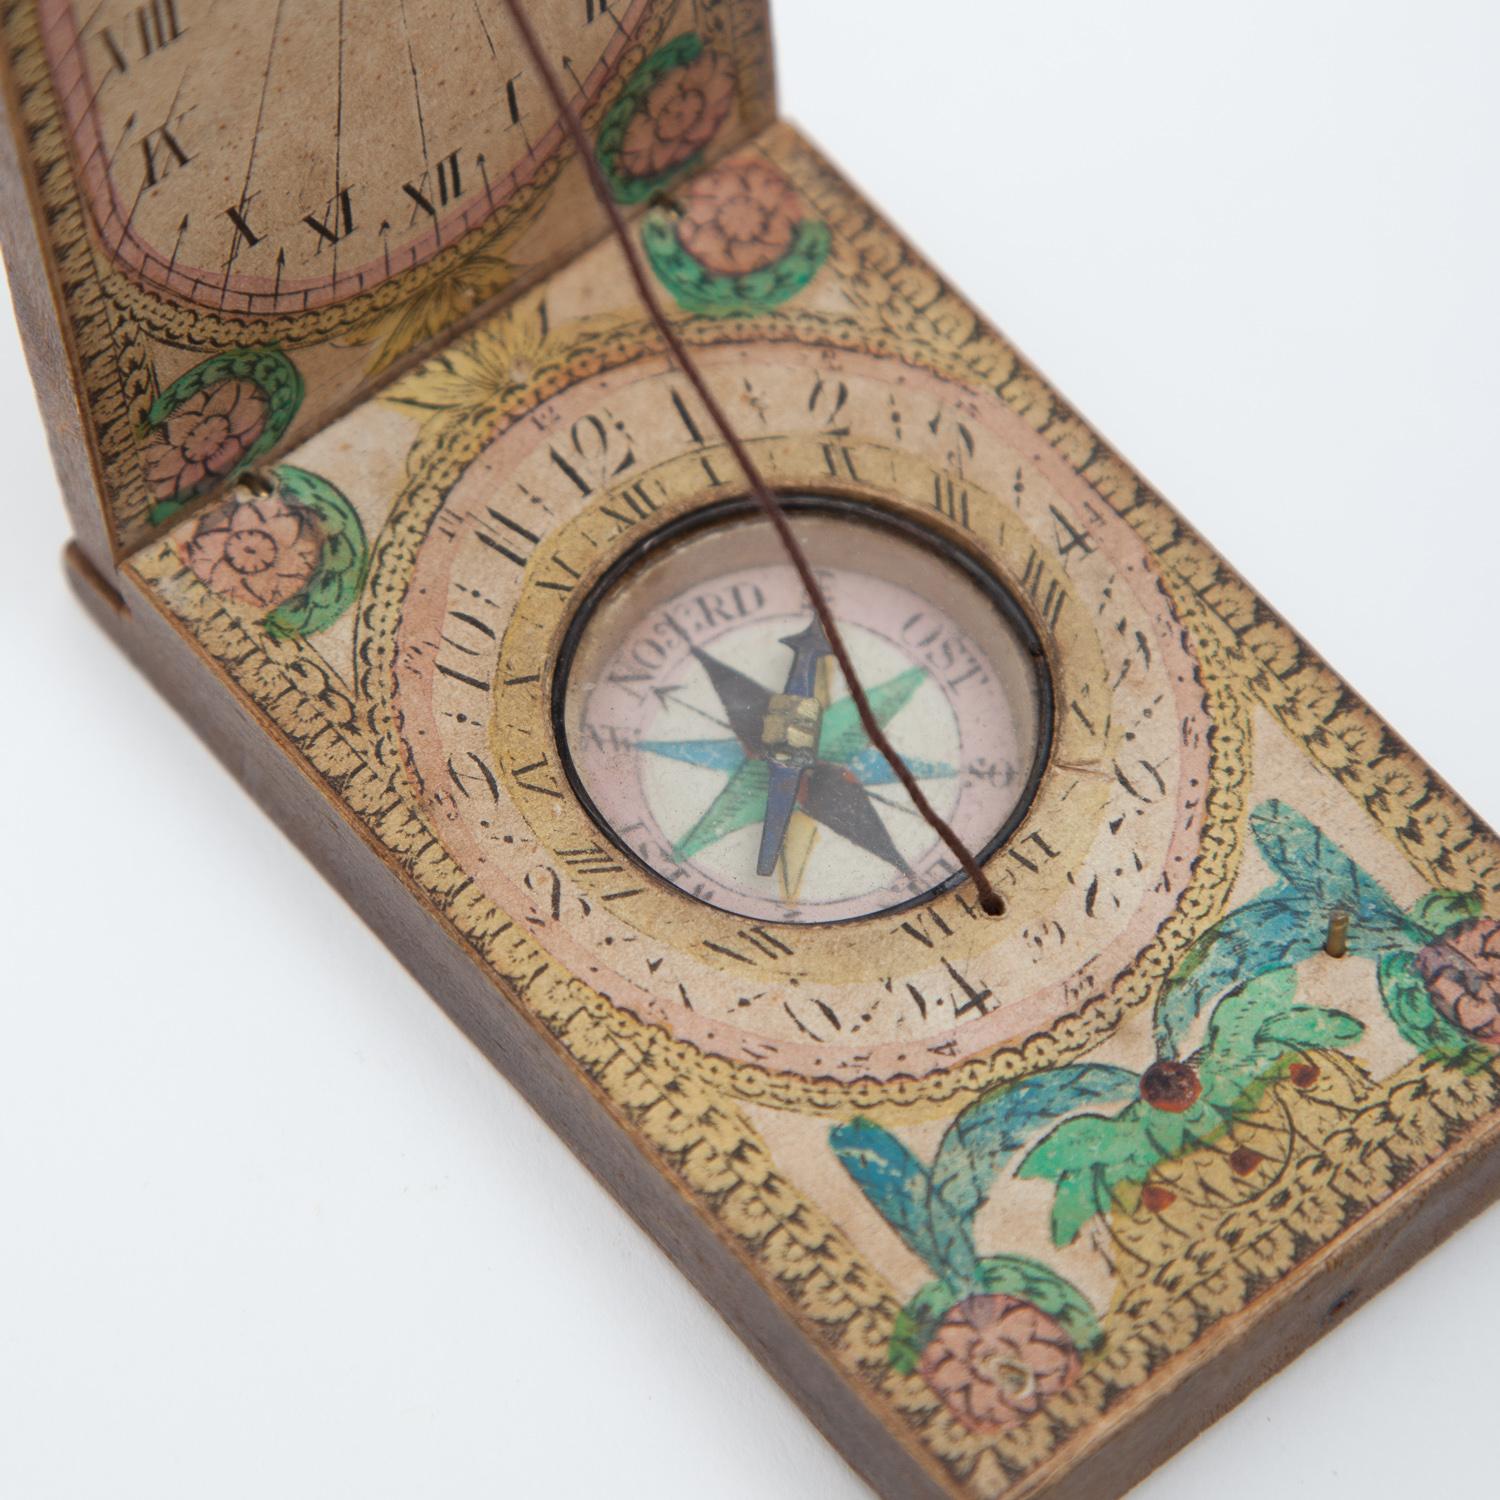 Exquisite diptych portable maritime sundial and compass, circa 1780.

Made from fruitwood and hand-painted paper. Excellent condition, although the string has been replaced.